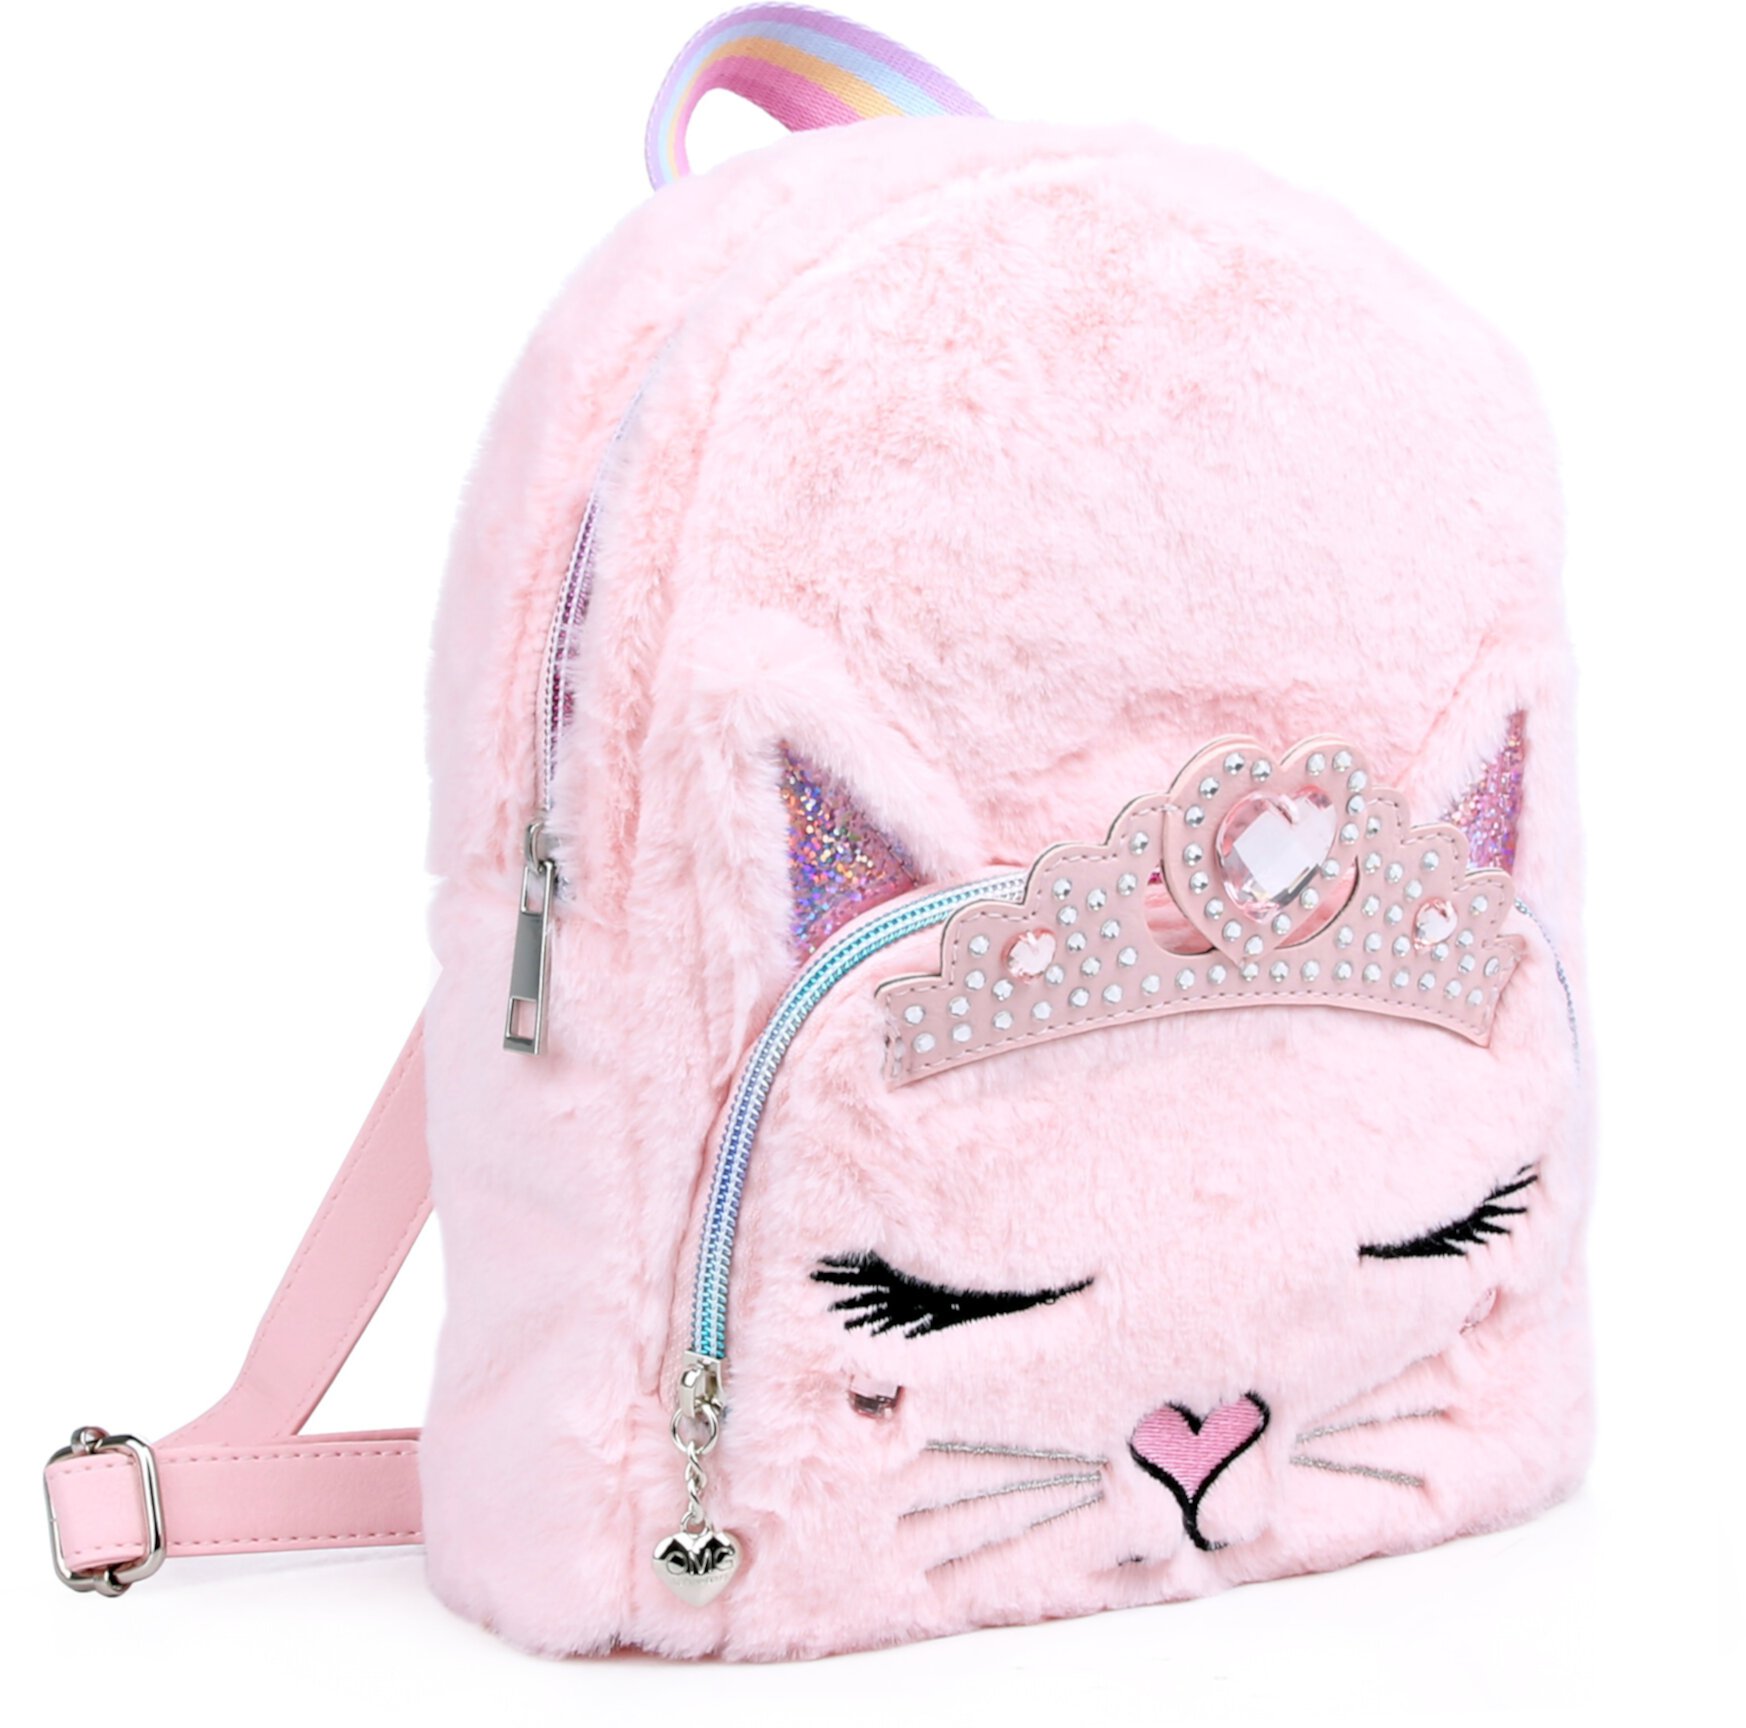 Bella Mini Backpack and Princess Pouch Set Miss Gwen’s OMG Accessories